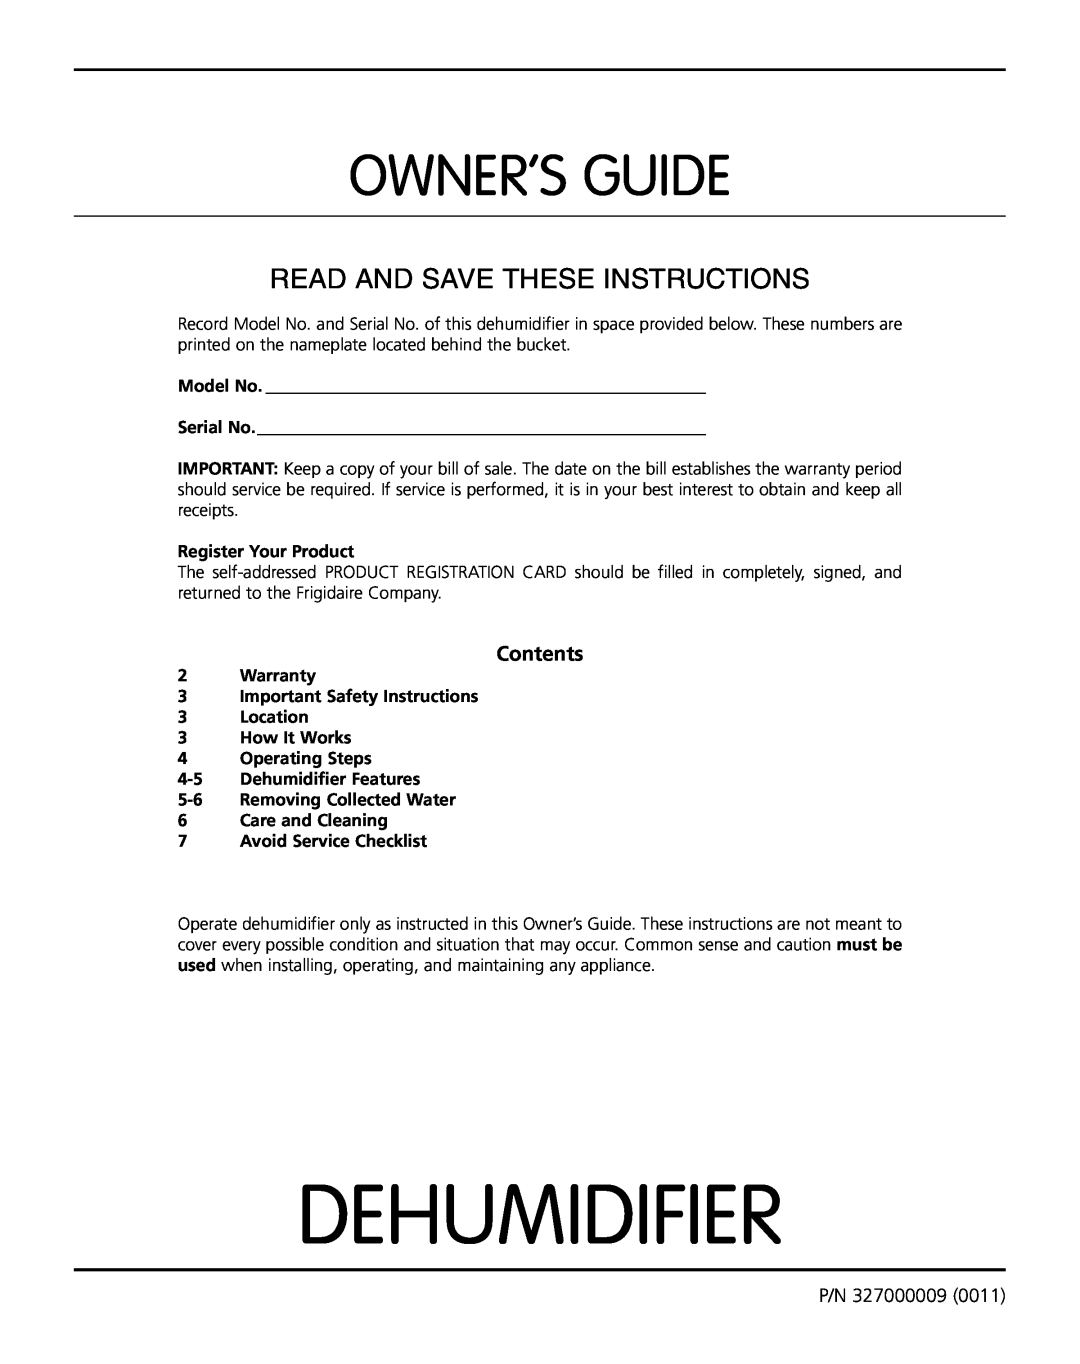 Frigidaire warranty Contents, Dehumidifier, Owner’S Guide, Read And Save These Instructions, P/N 327000009 